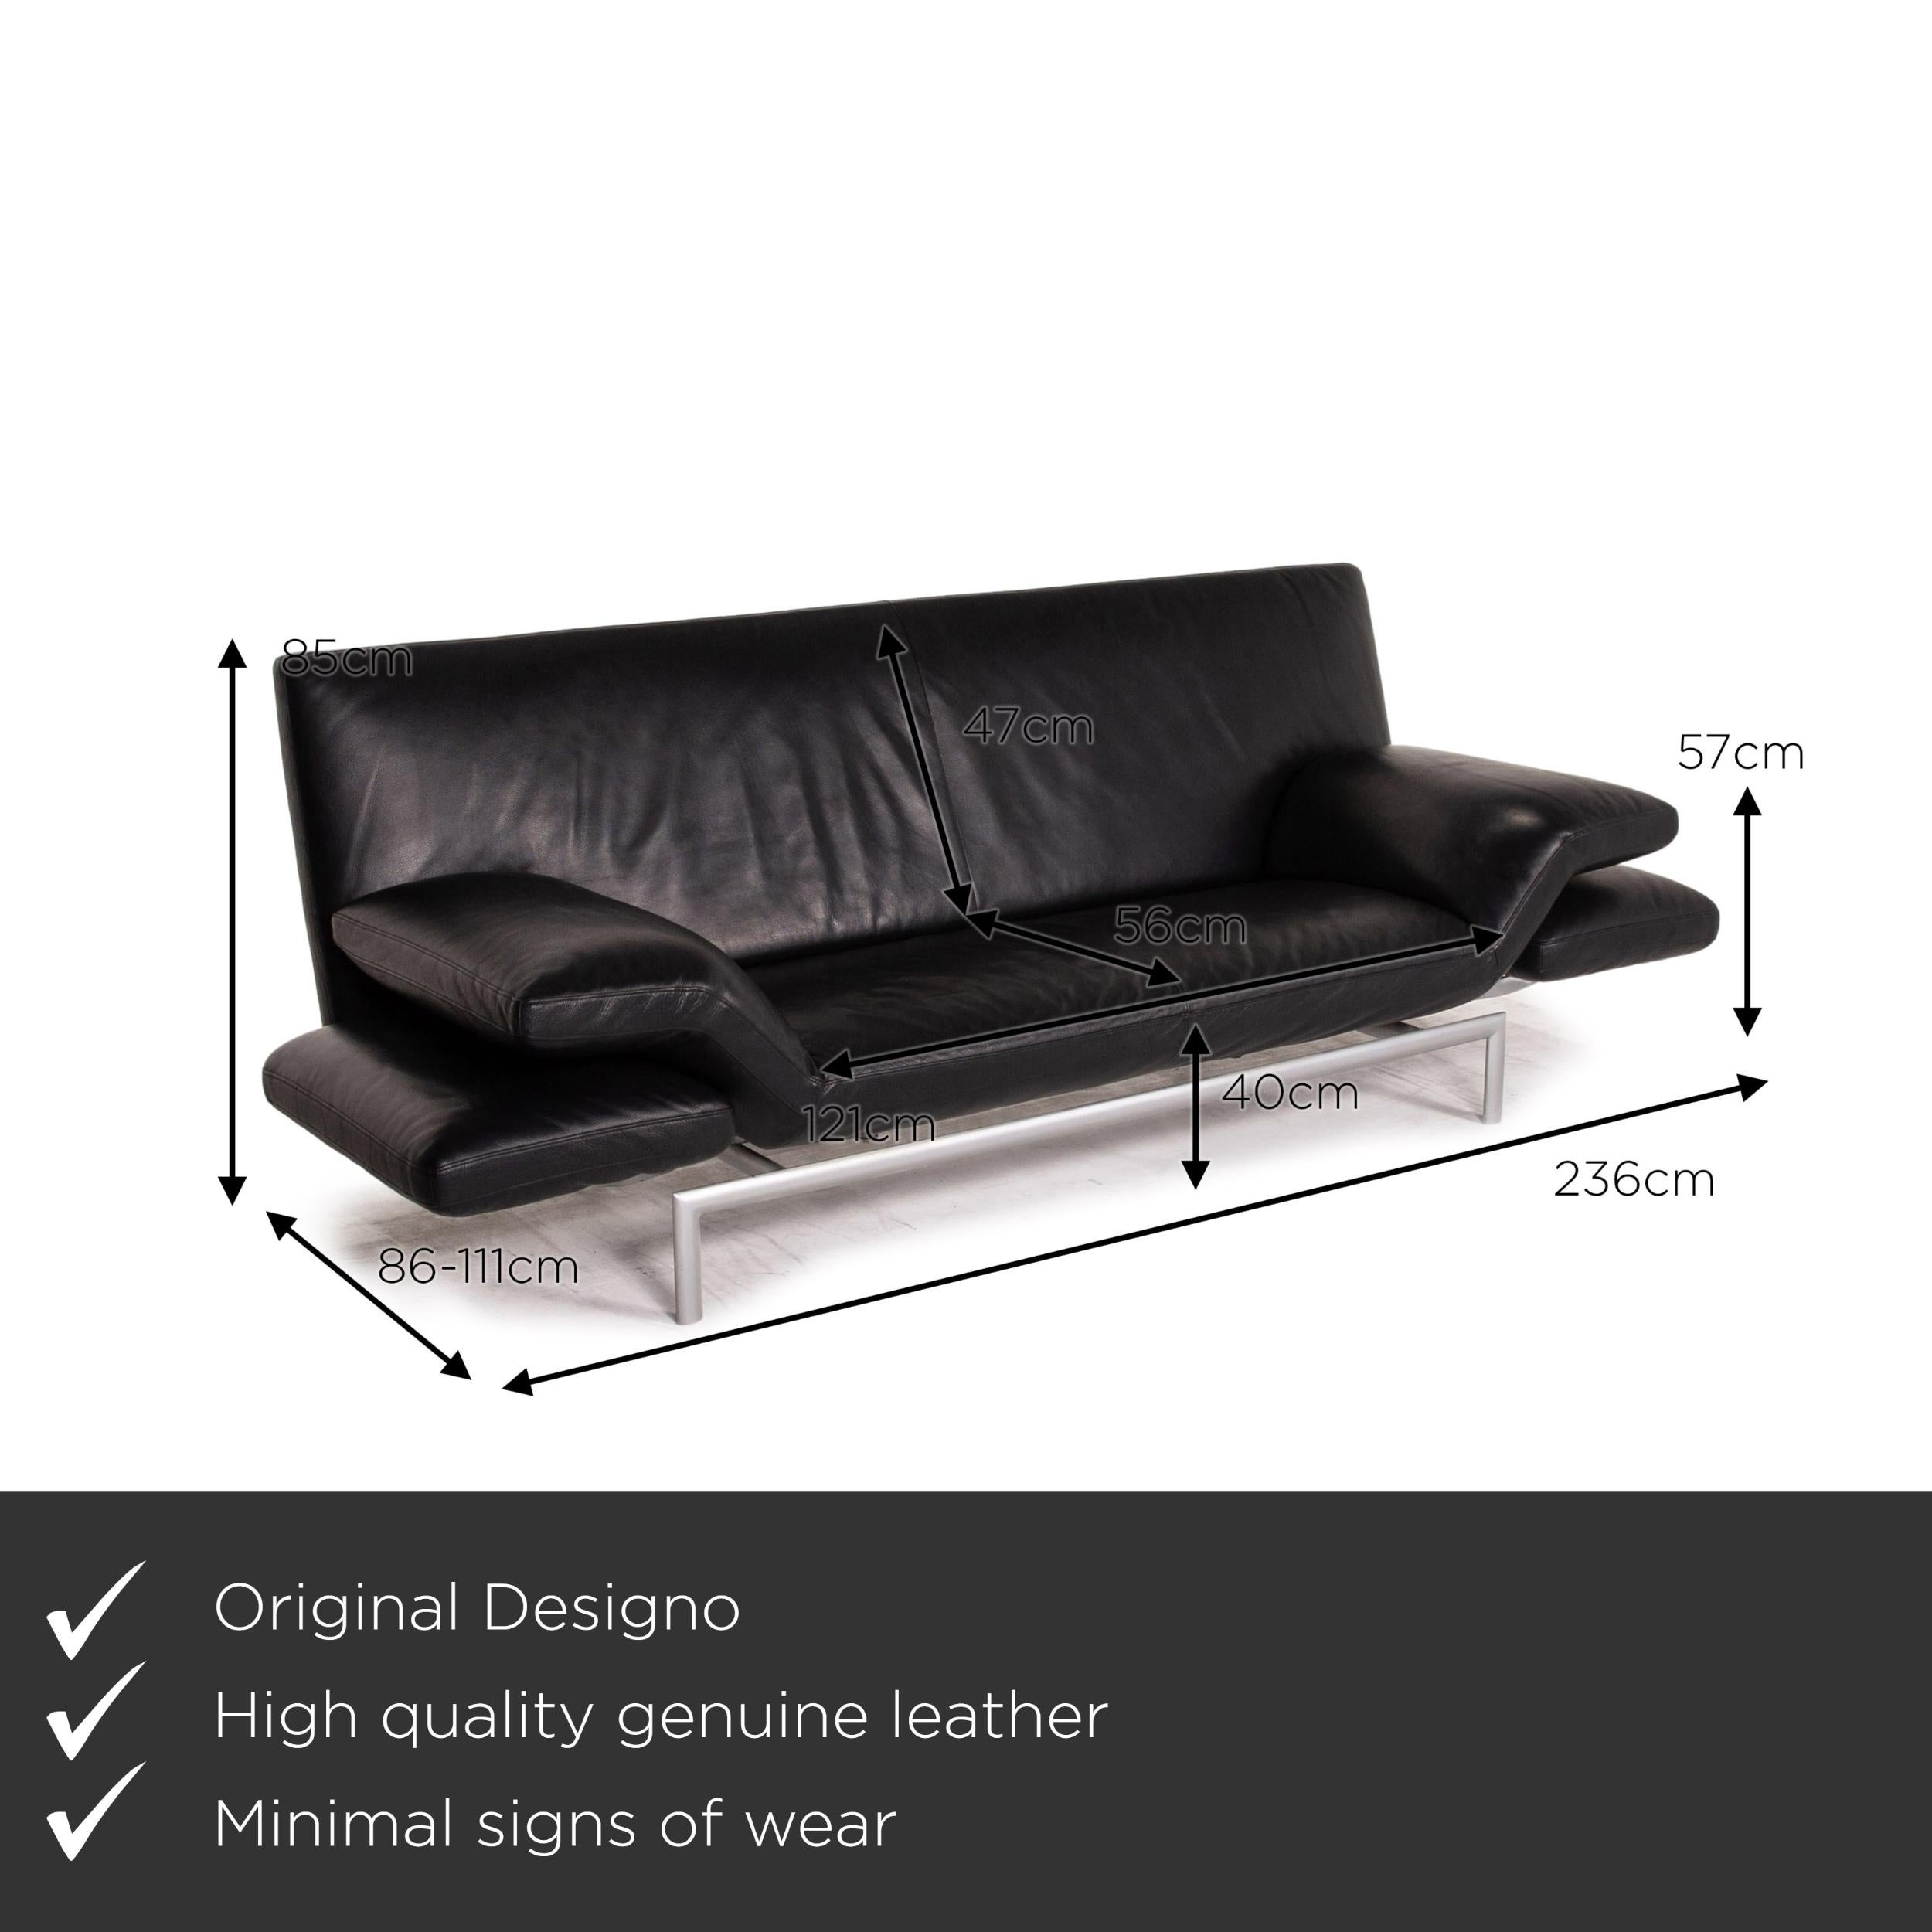 We present to you a Designo Flyer leather sofa black two-seat function couch.

Product measurements in centimeters:

Depth 86
Width 236
Height 85
Seat height 40
Rest height 57
Seat depth 56
Seat width 121
Back height 47.
 
    
  